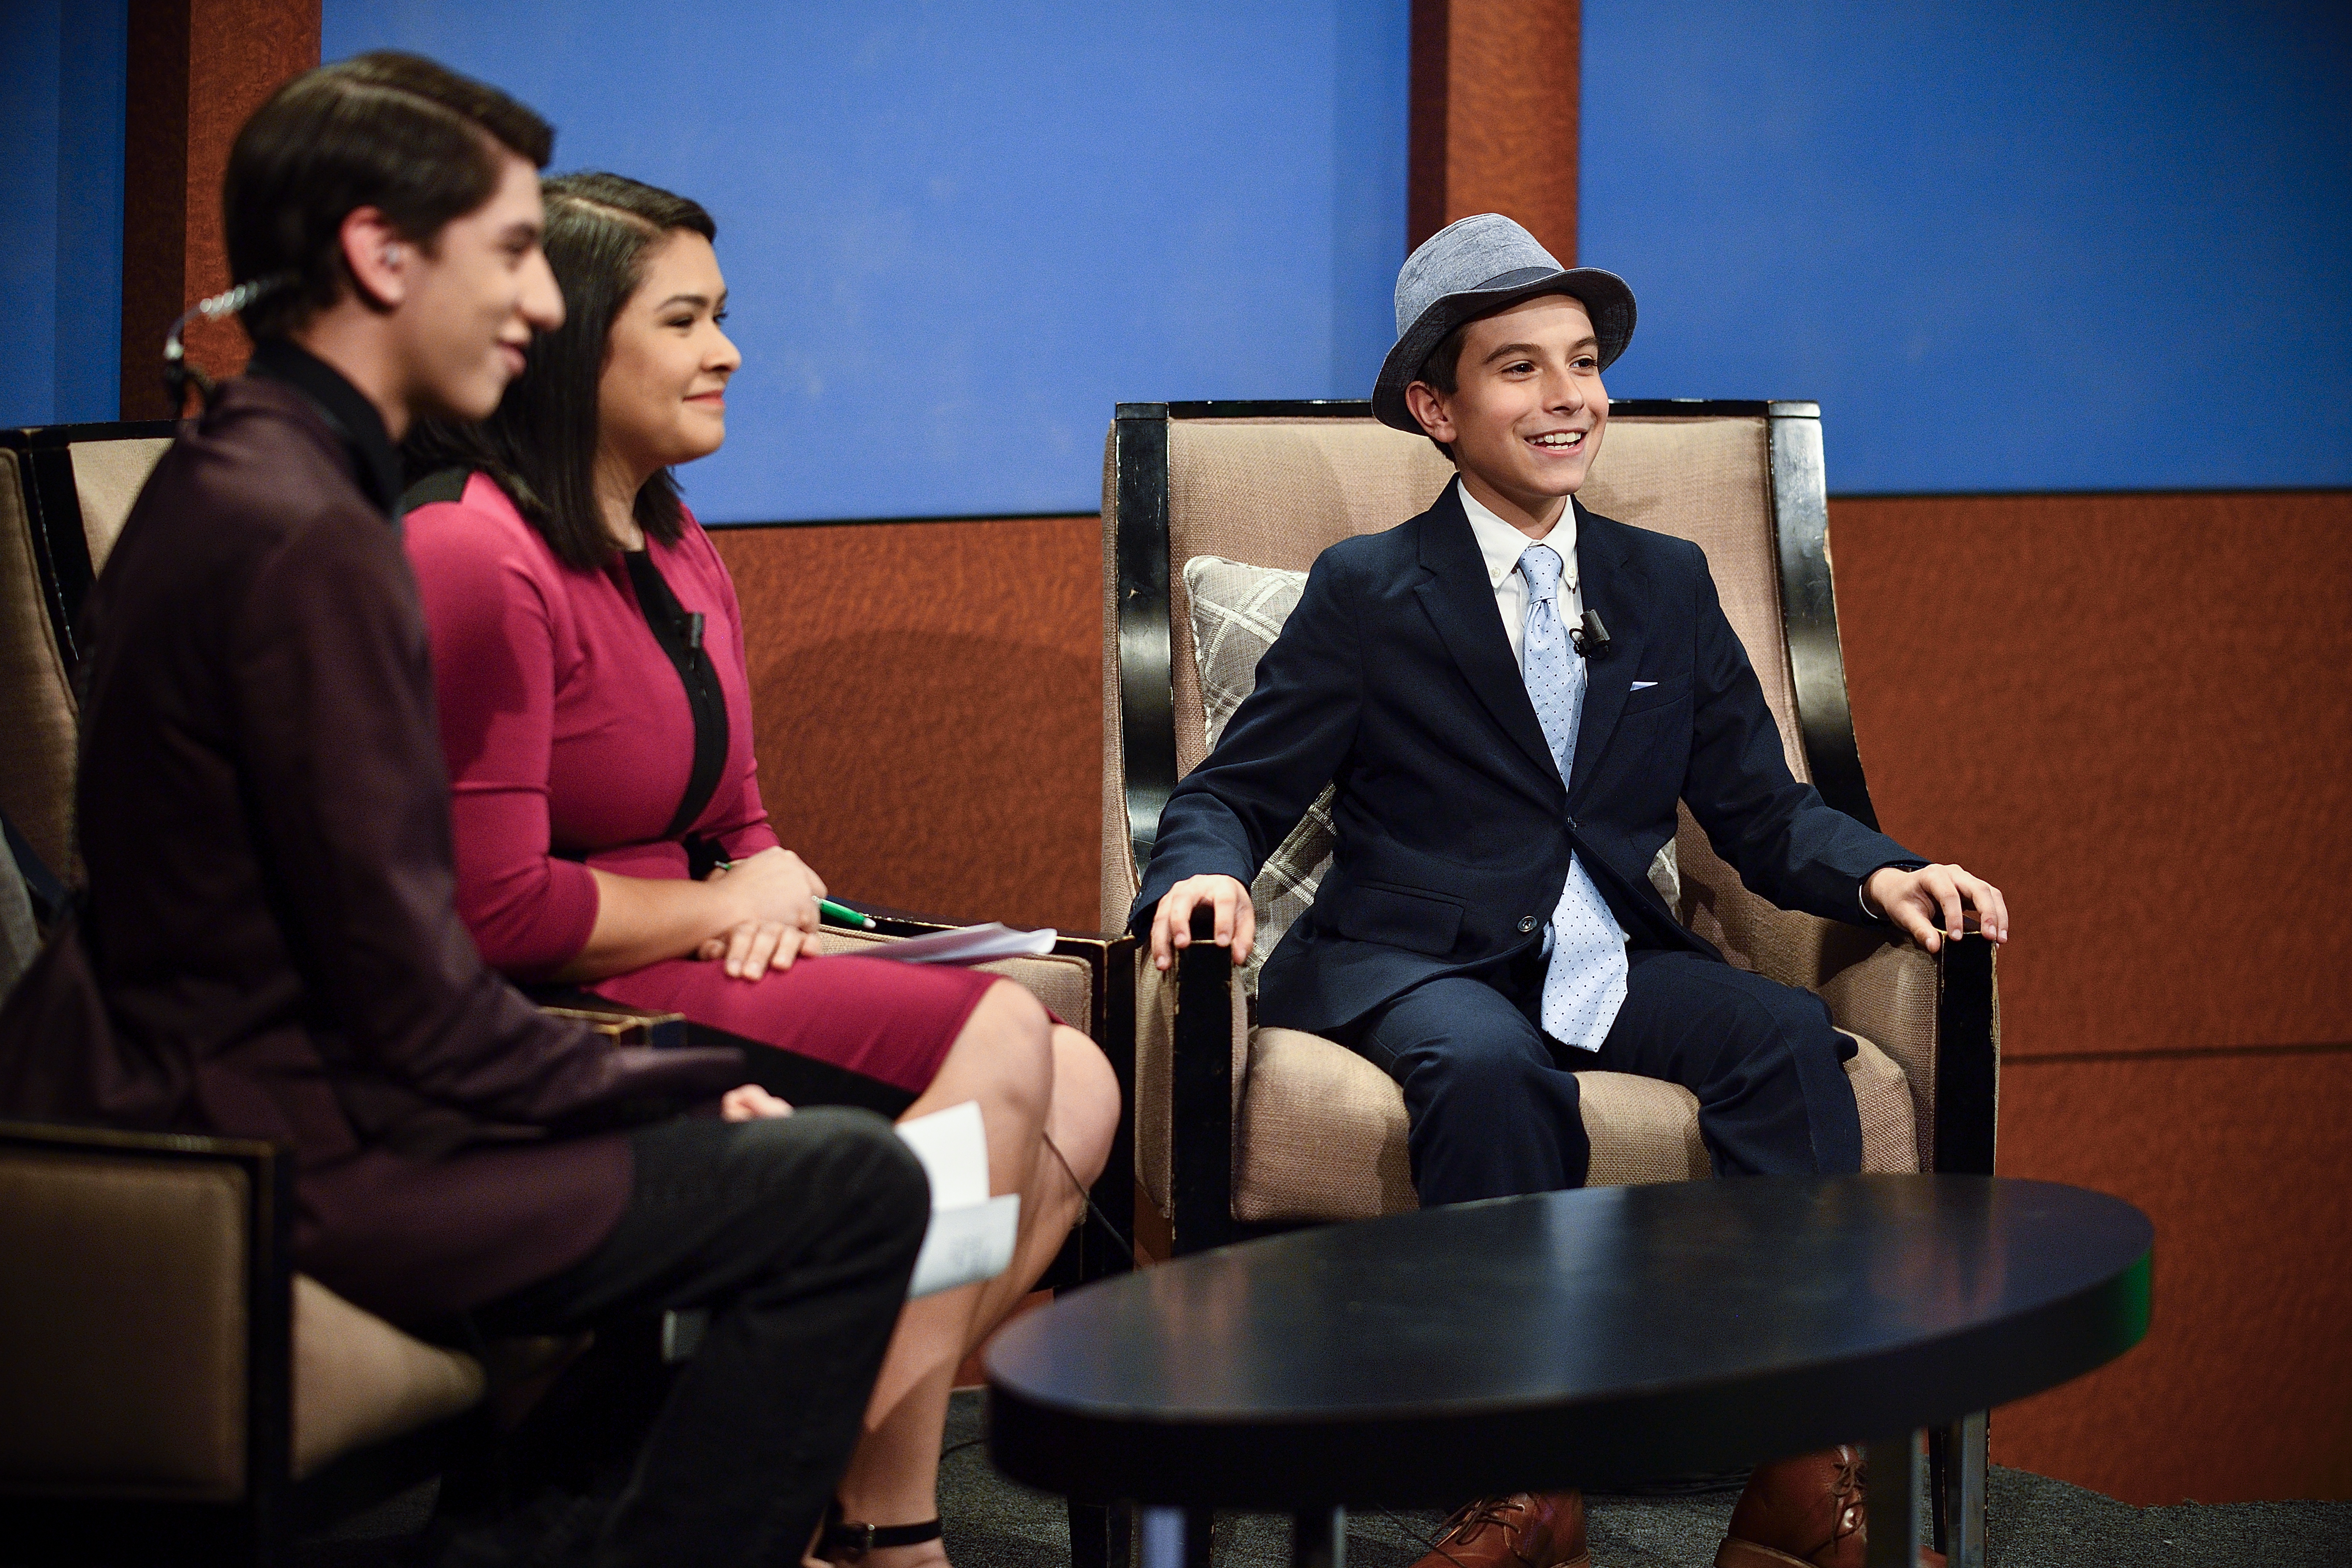 Phoenix Legg is seated in a chair next to a man and a woman, both anchors for ntTV